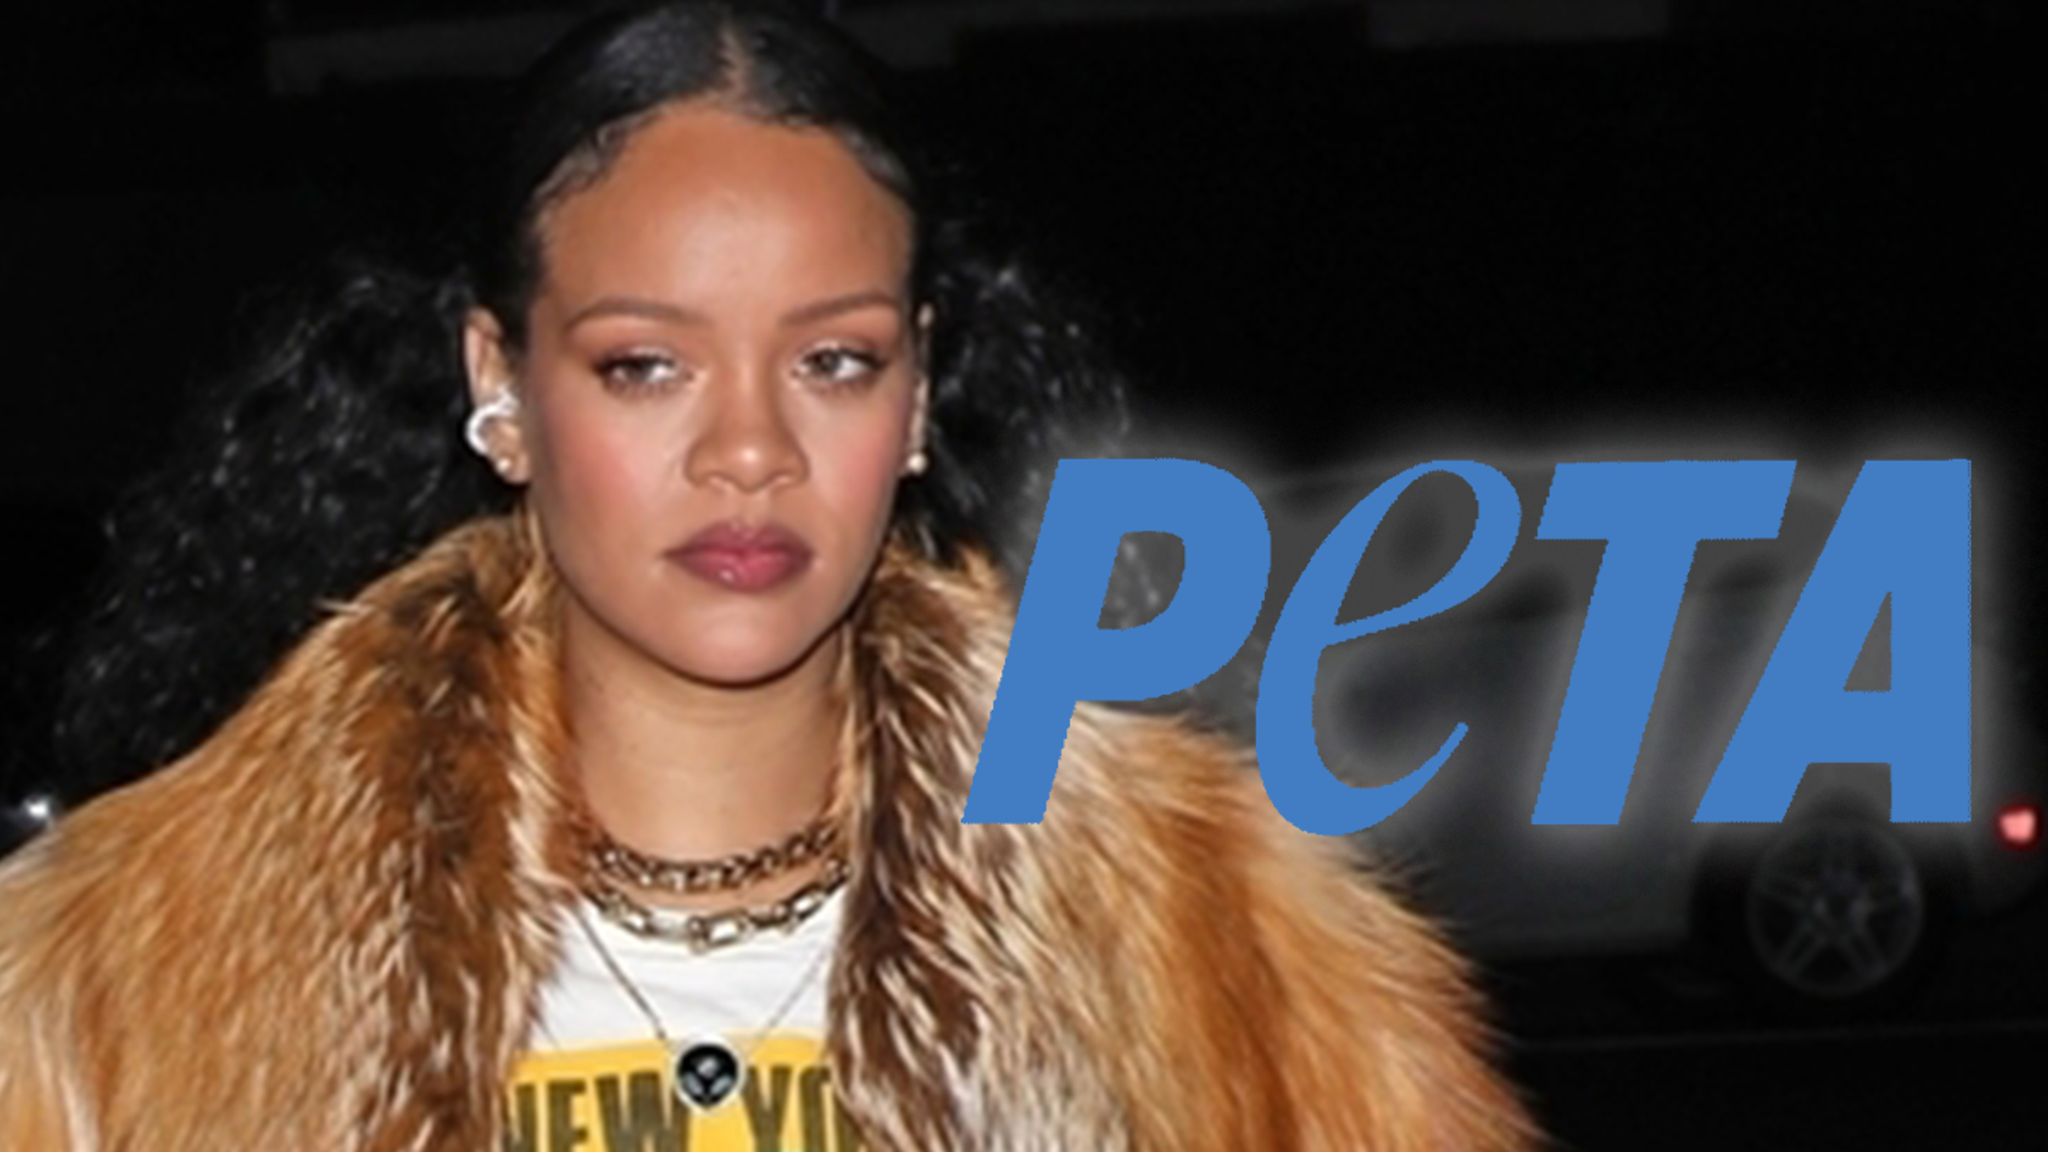 Rihanna was gifted a faux fur coat from Peta after appearing to wear a real fur coat